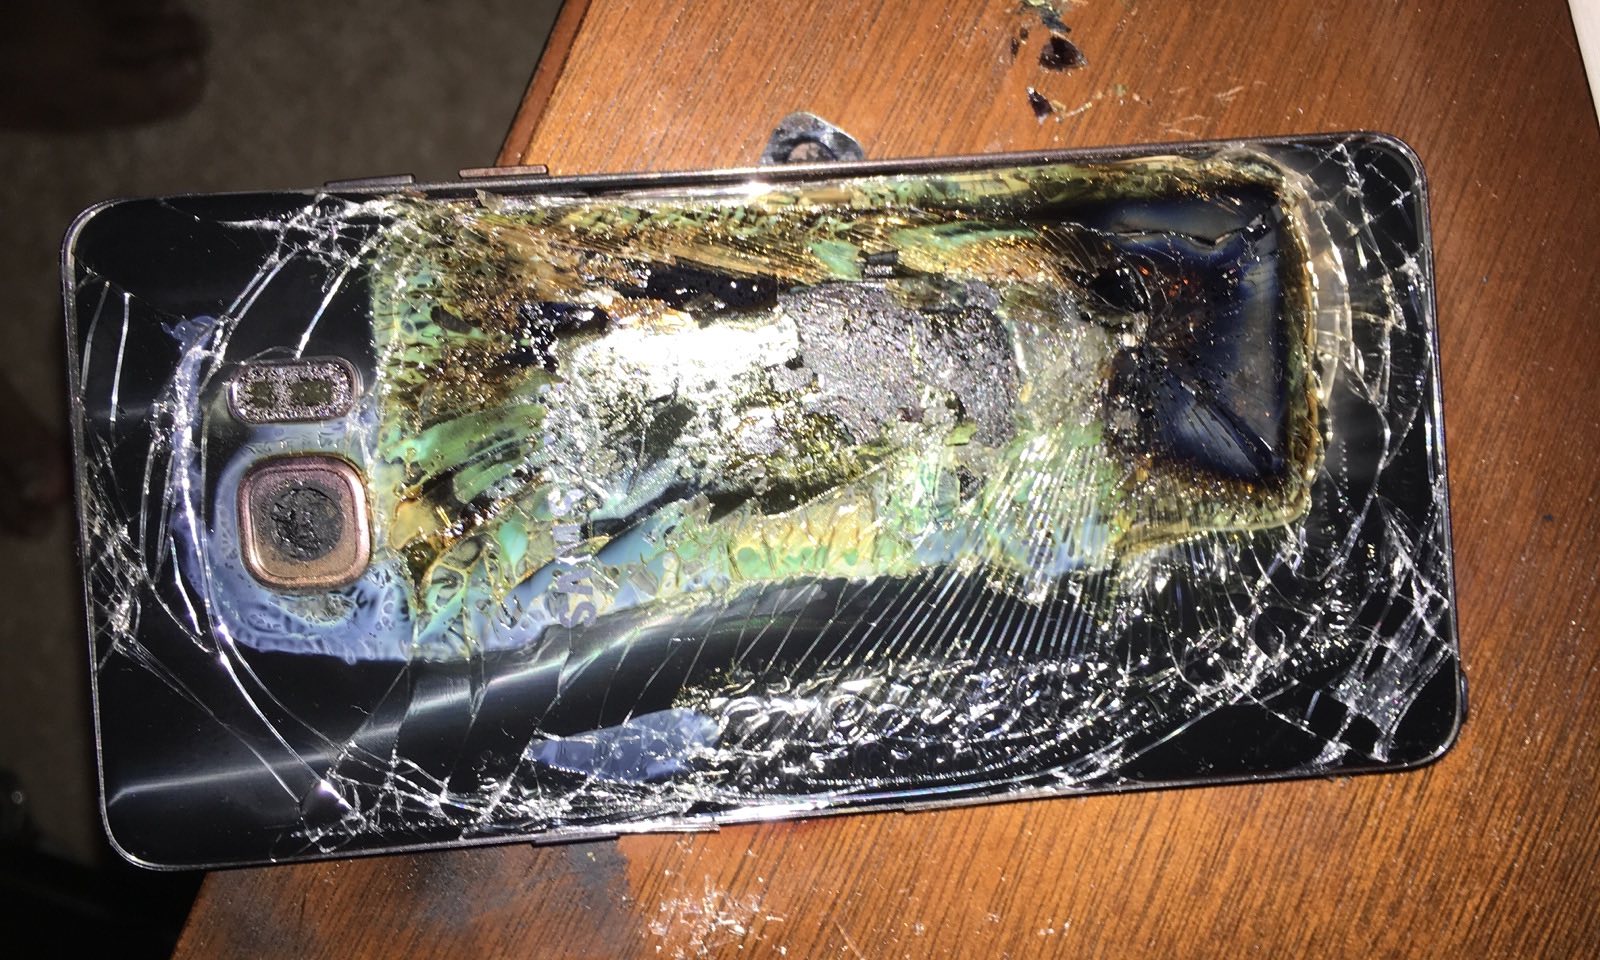 We now know why Galaxy Note7 units were exploding